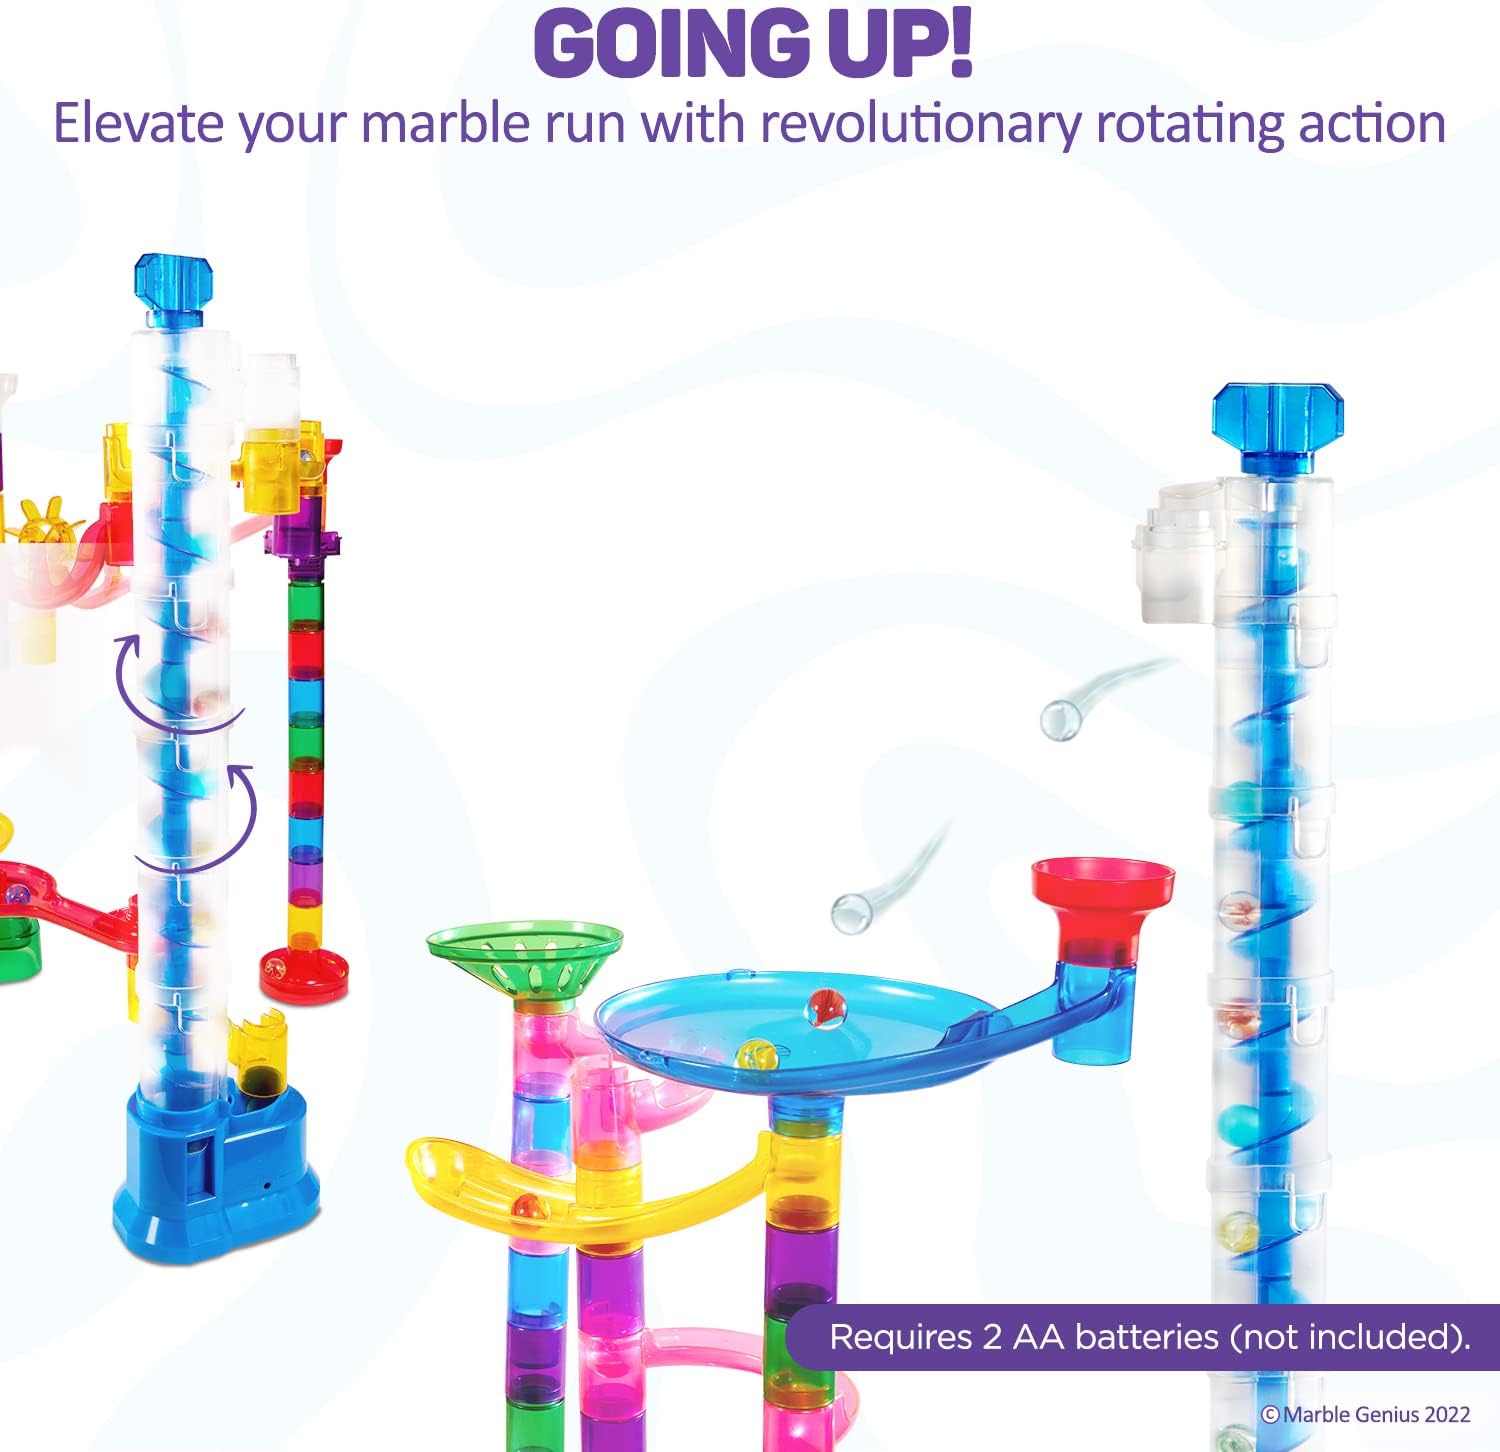 5 years and up Marble Genius Auger Lift: Expandable Marble Run Accessory Set Automatically Elevates Marbles Up to 19 Inches, for Infinite Loop